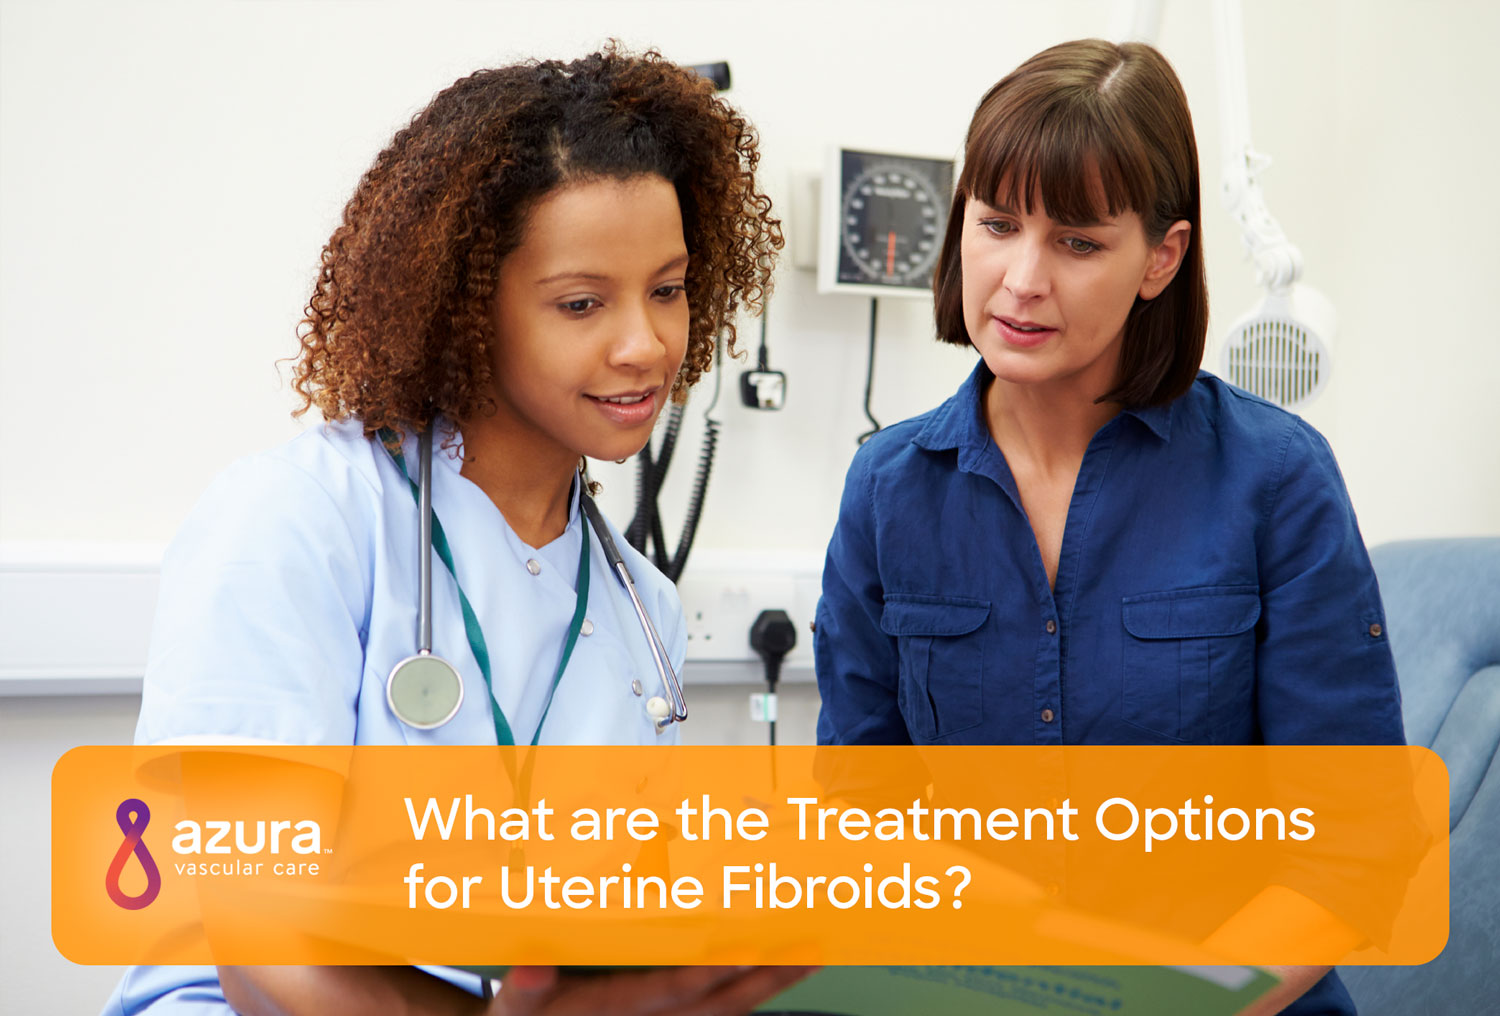 Understand The Treatment Options For Uterine Fibroids